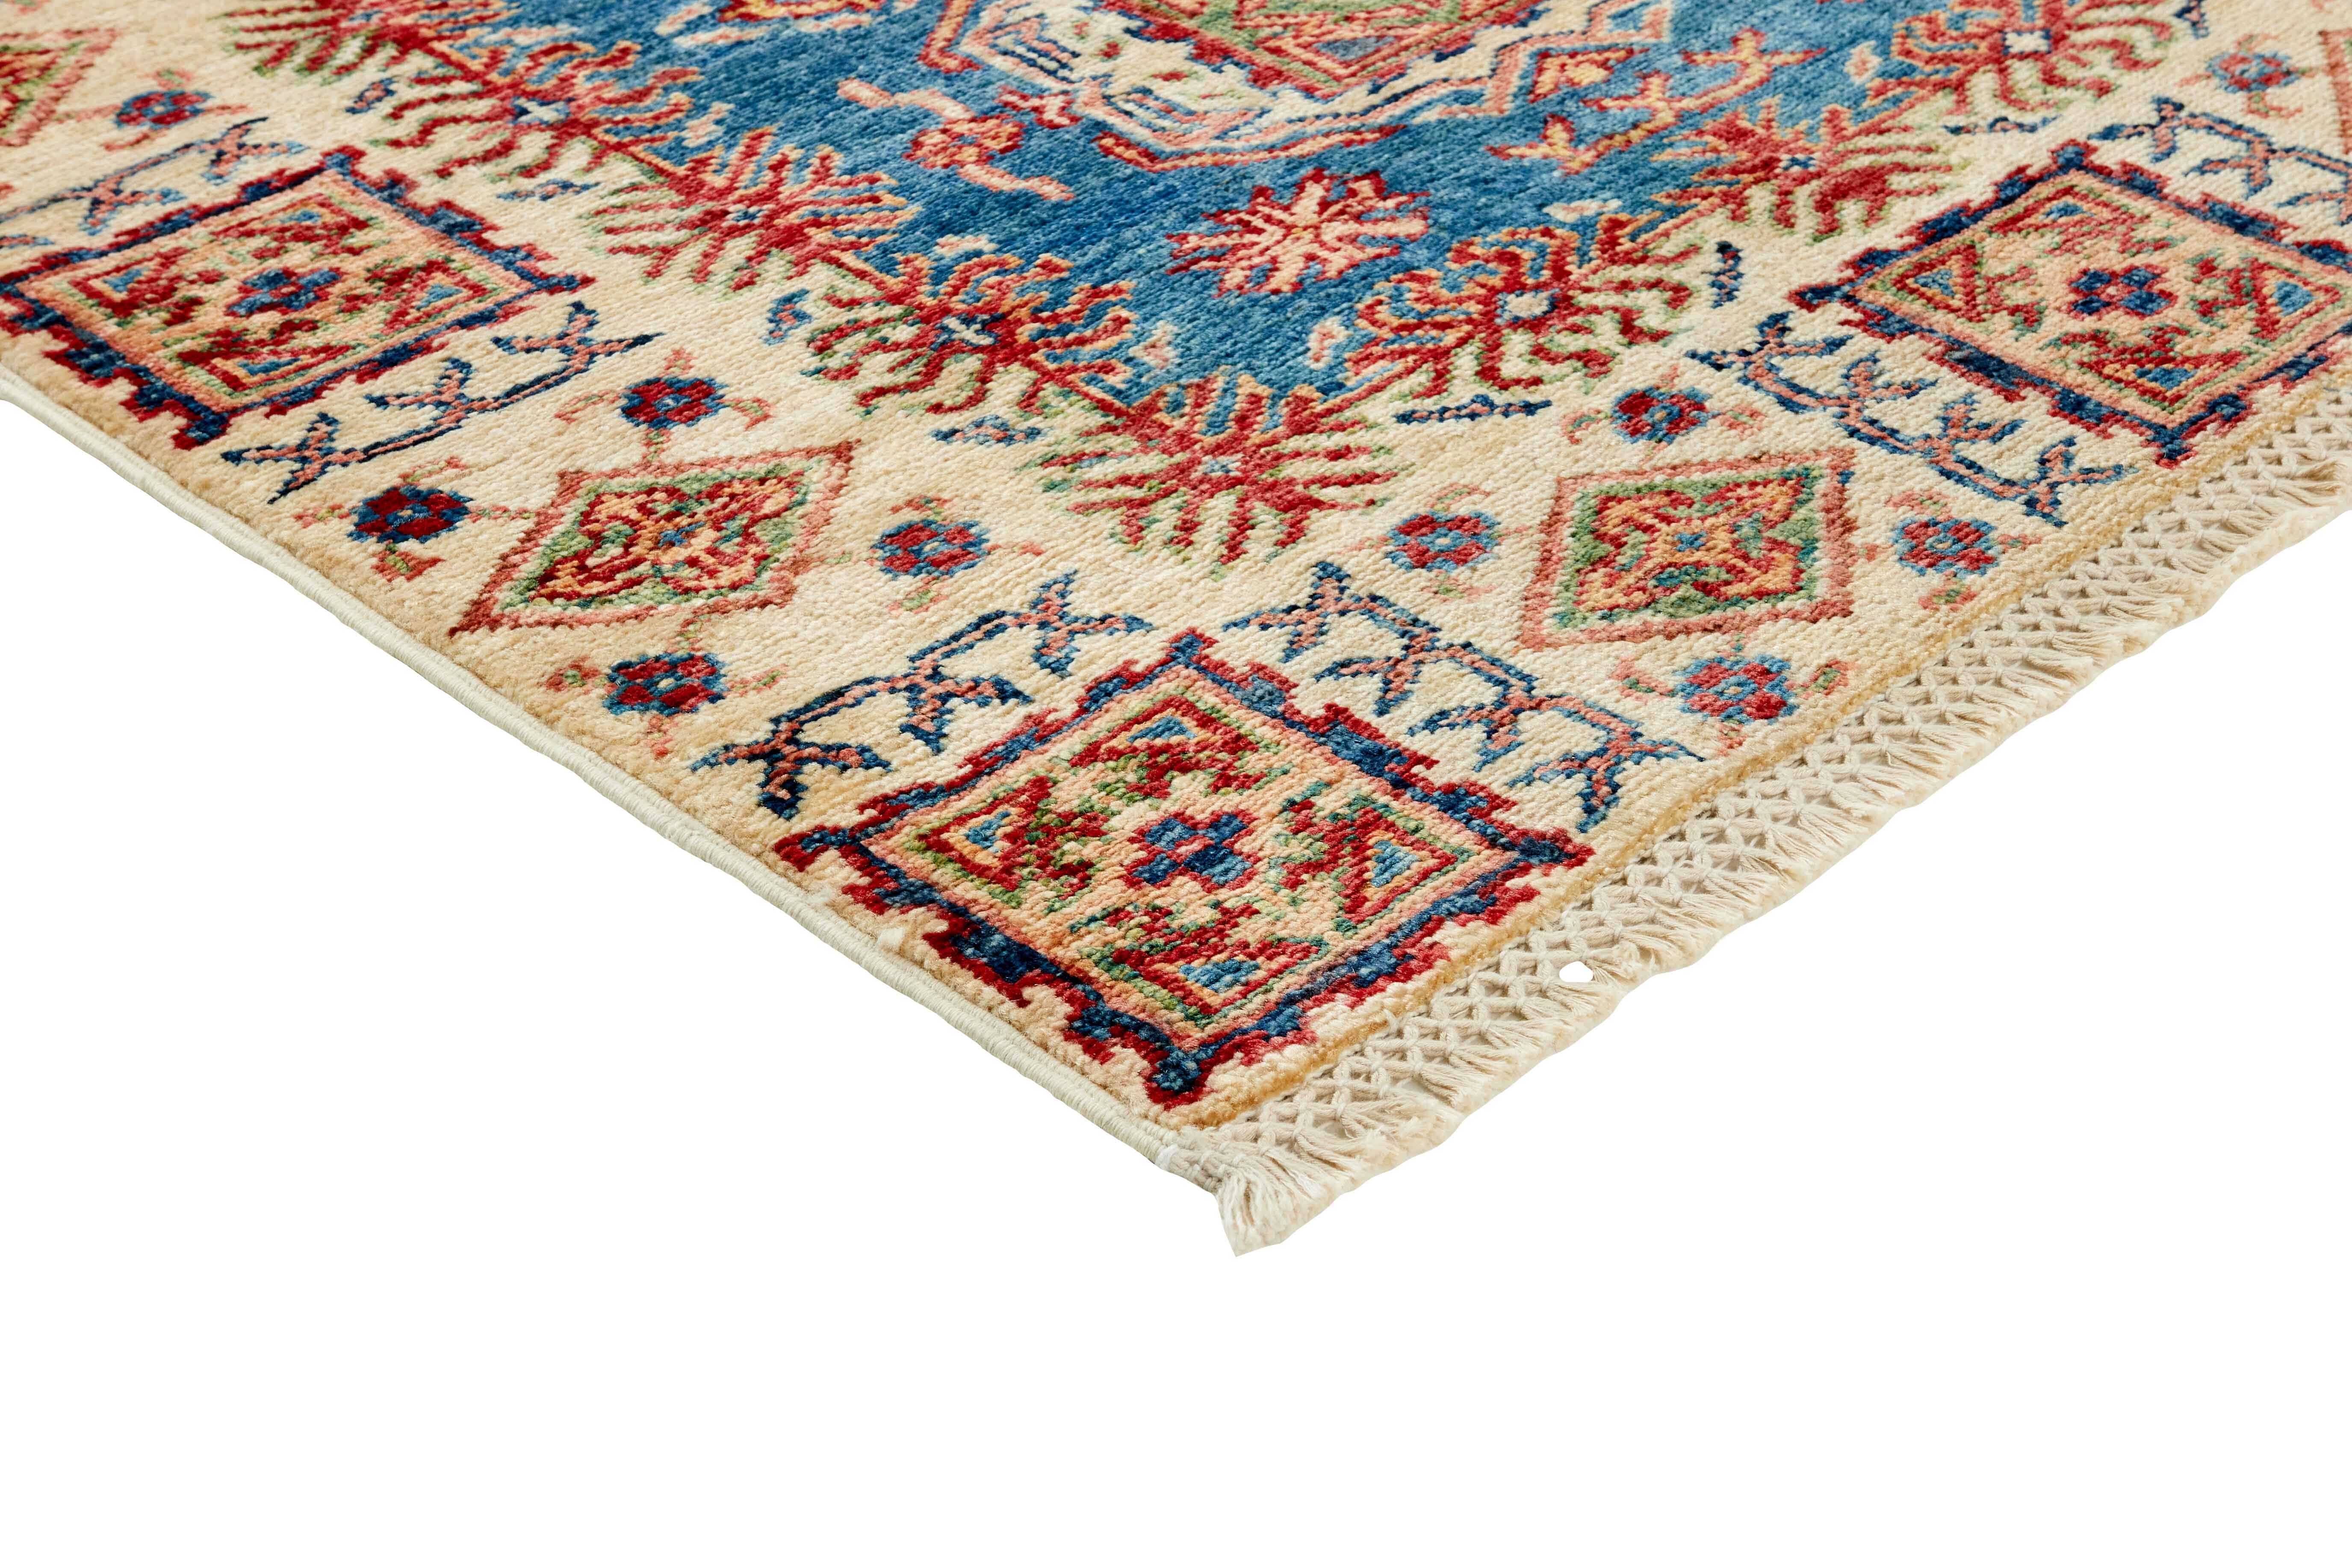 Authentic oriental rug with red